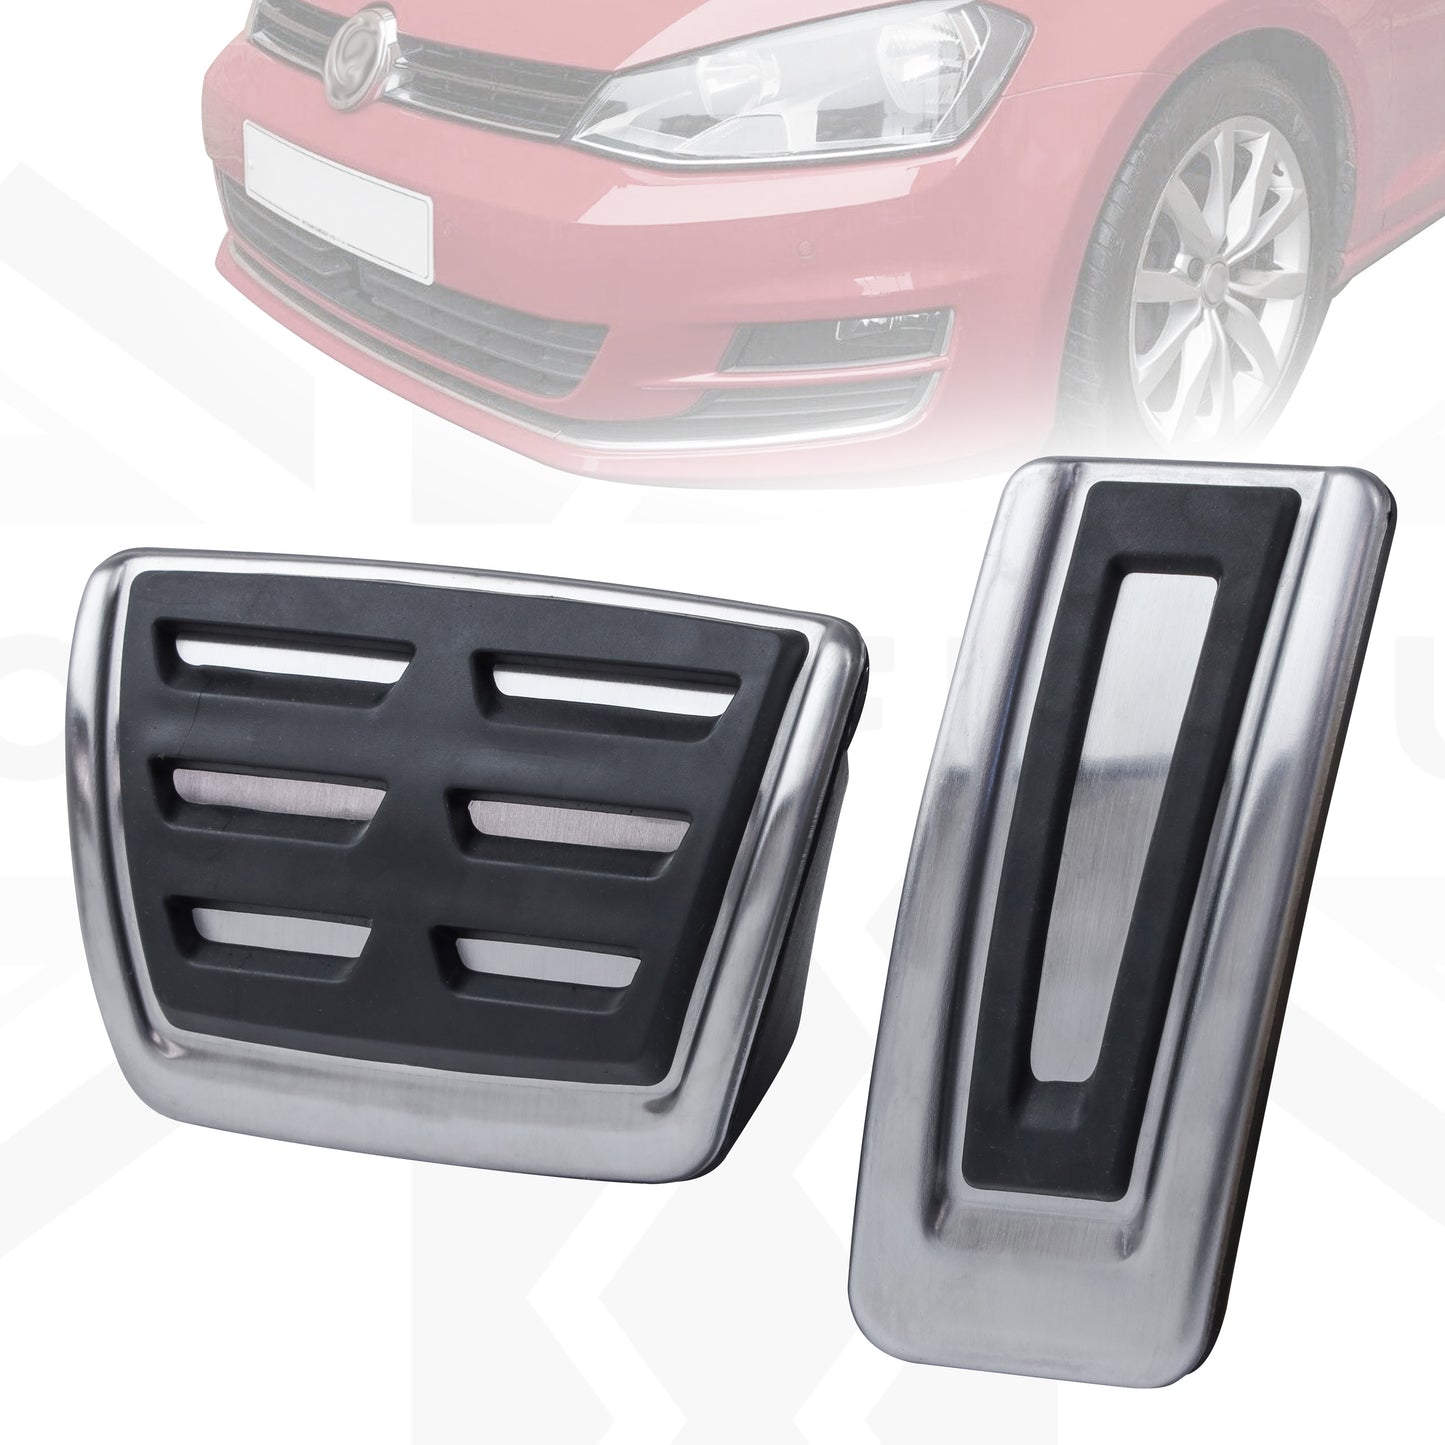 2pc Automatic Pedal Cover Kit for VW Golf Mk7 & Mk7.5